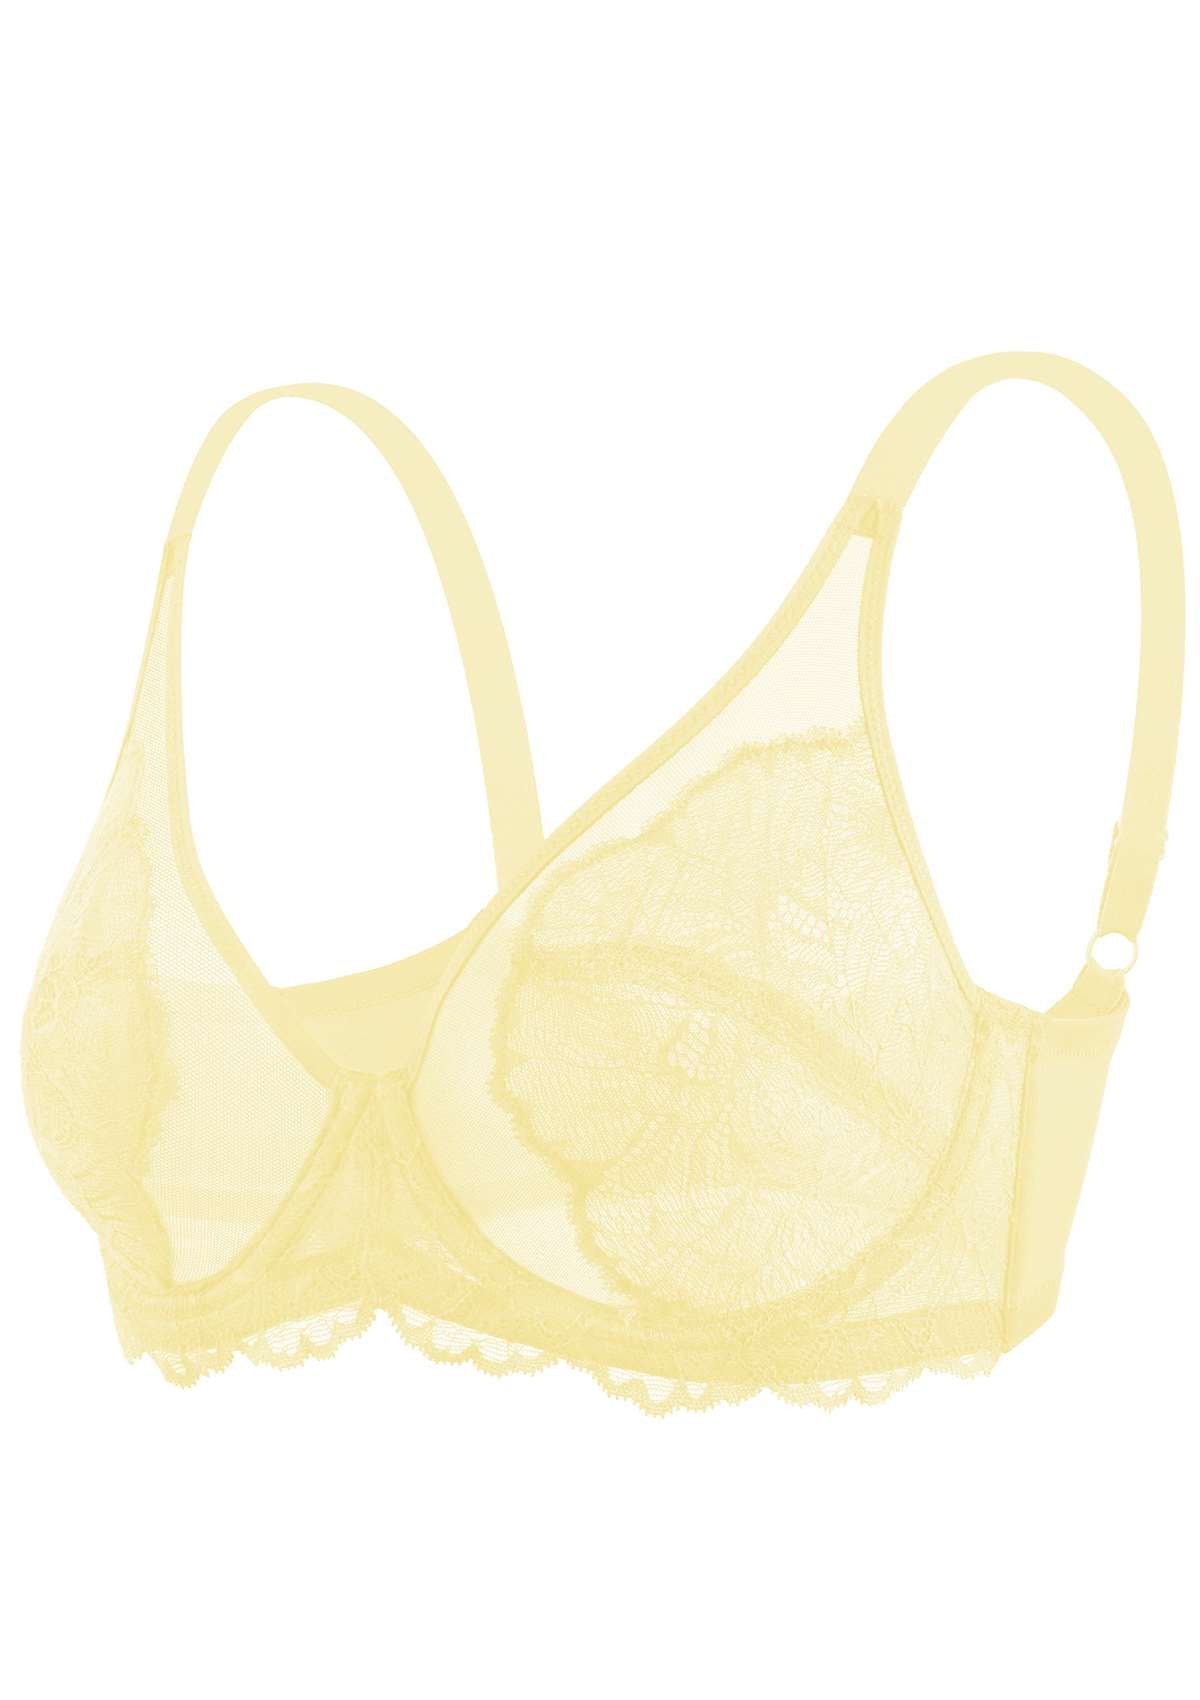 HSIA Blossom Full Coverage Side Support Bra: Designed For Heavy Busts - Beige / 38 / I